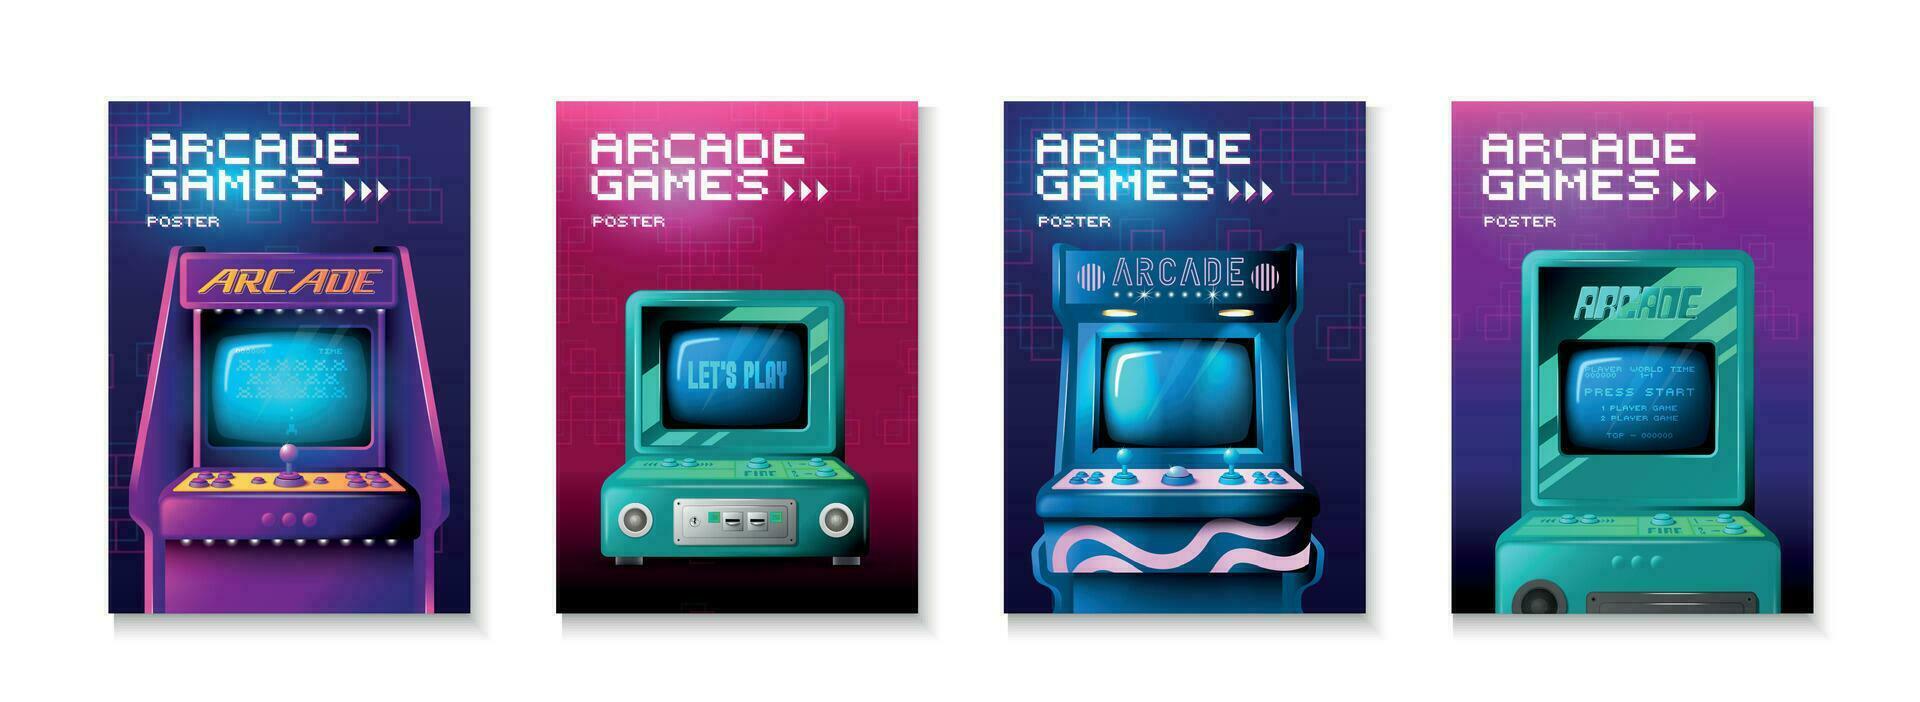 Arcade Game Realistic Poster Set vector